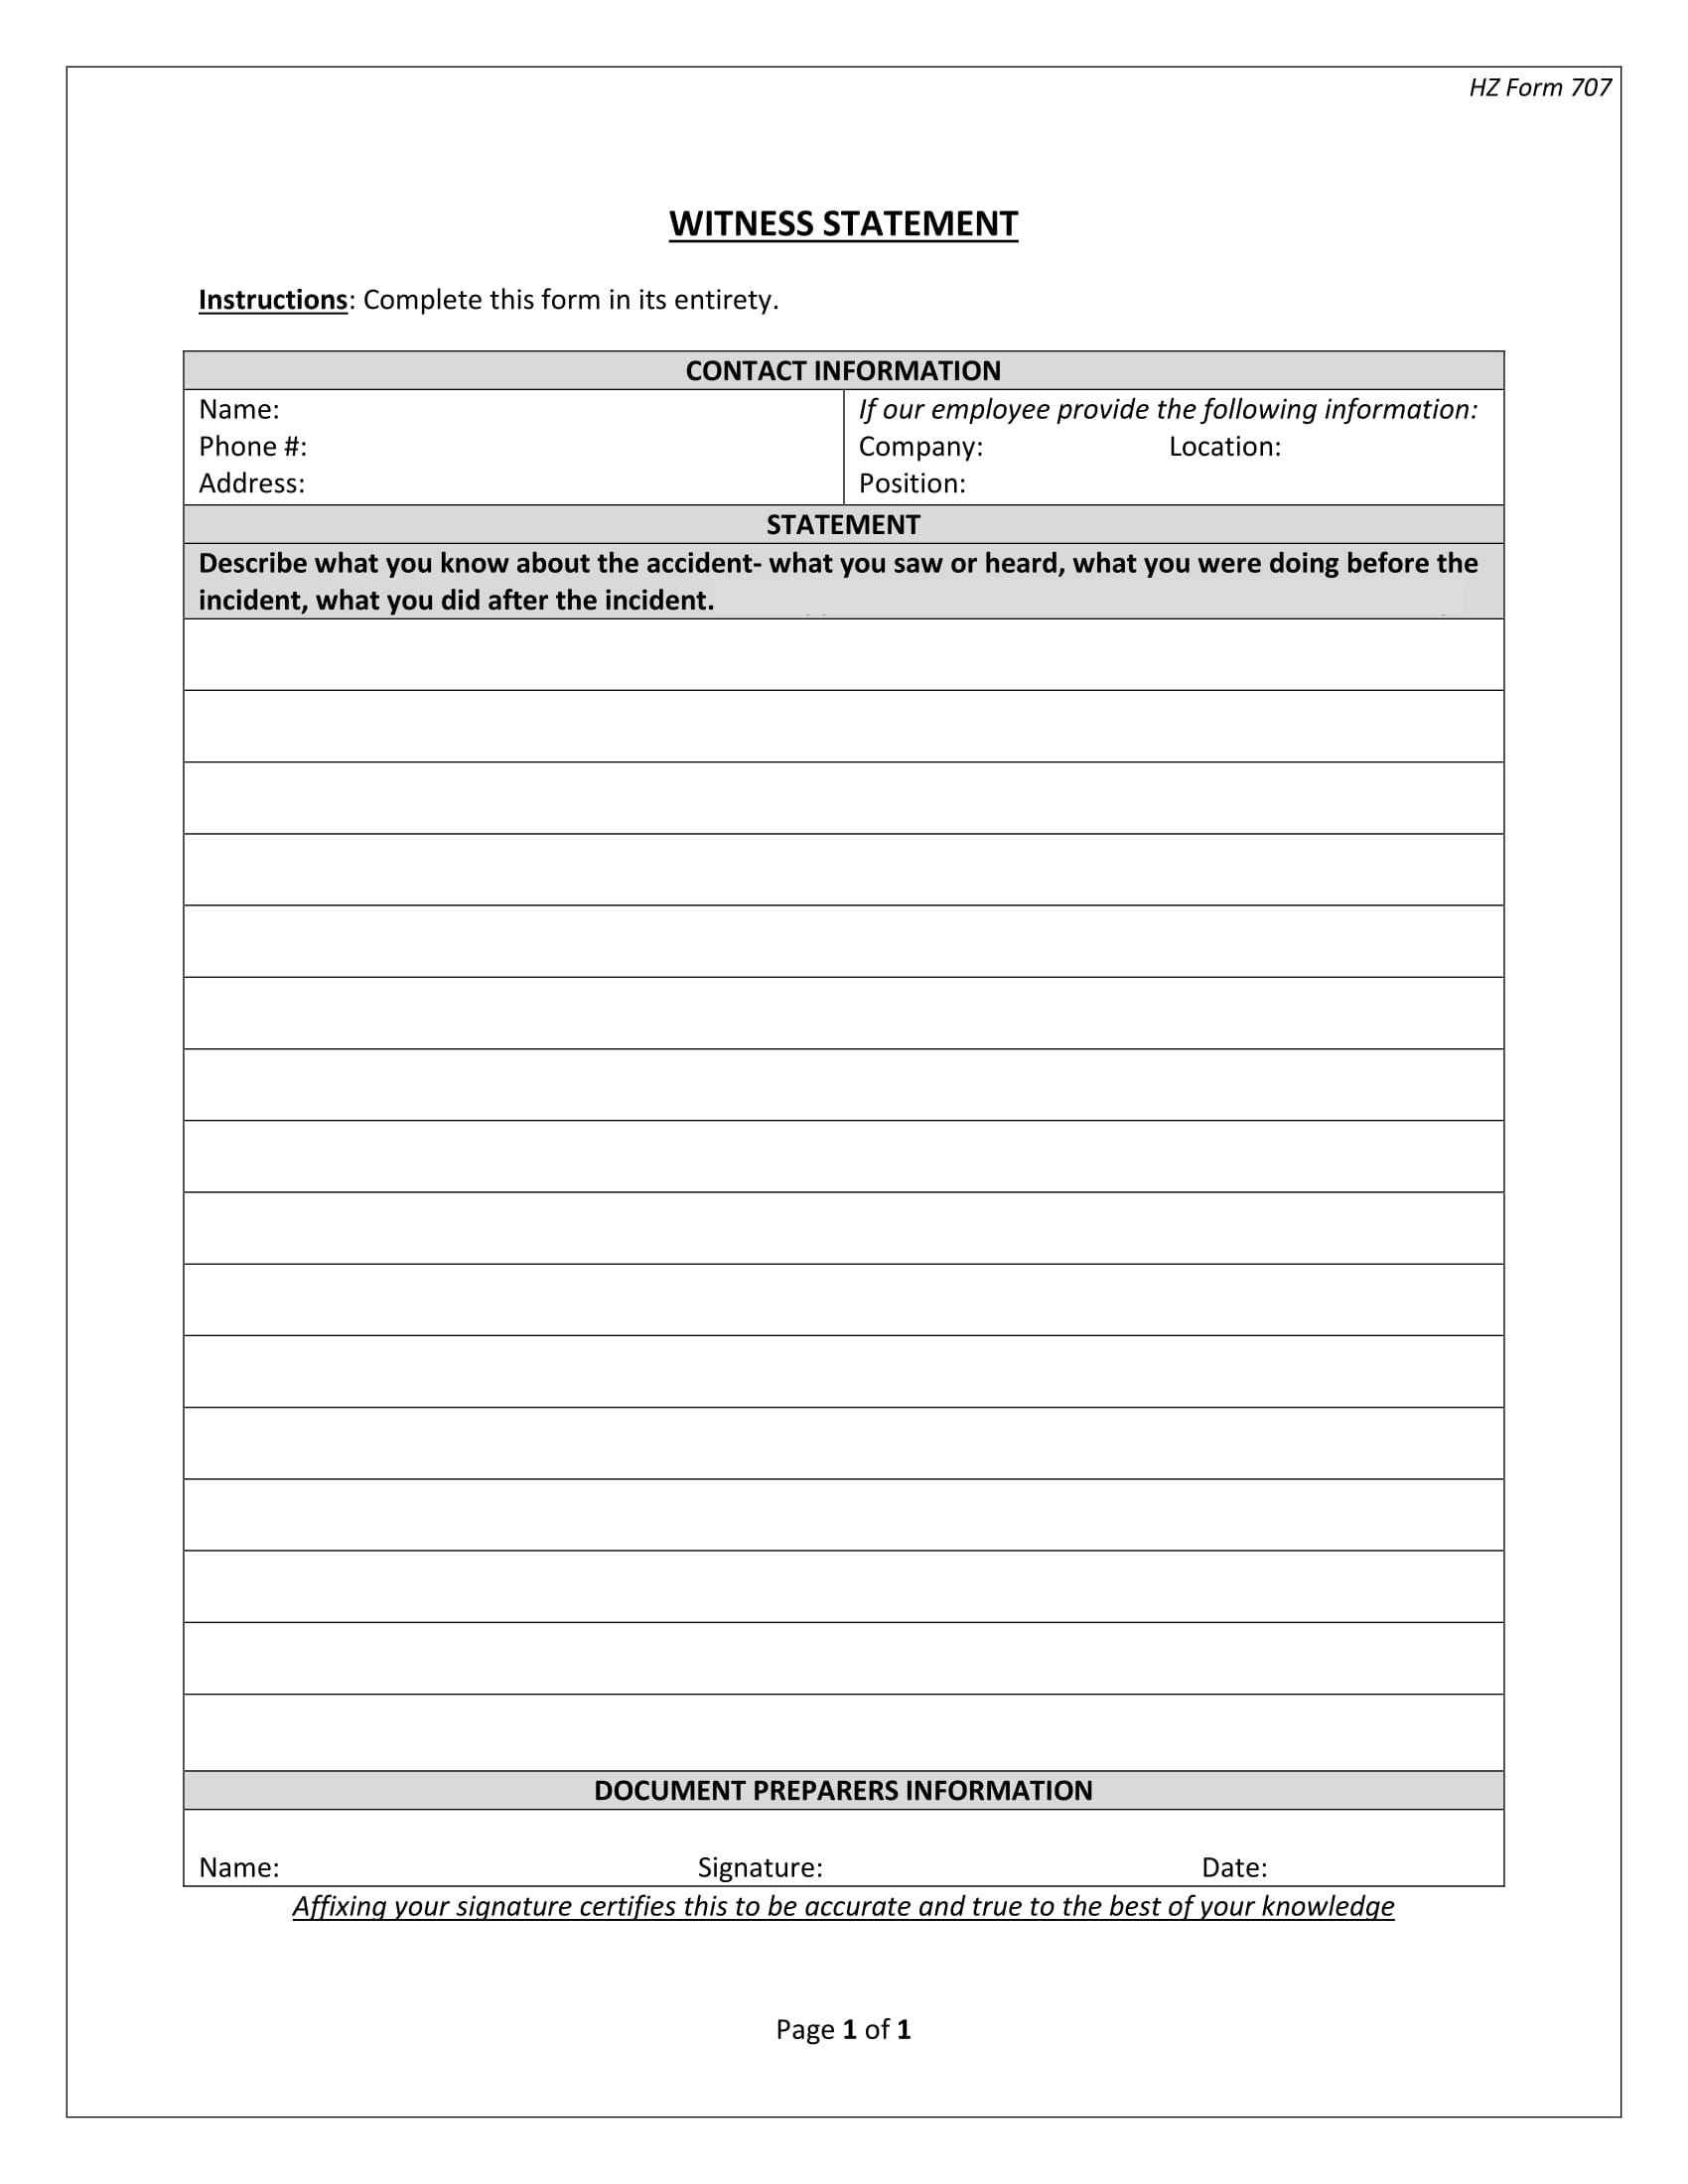 free-14-employee-witness-statement-forms-in-ms-word-pdf